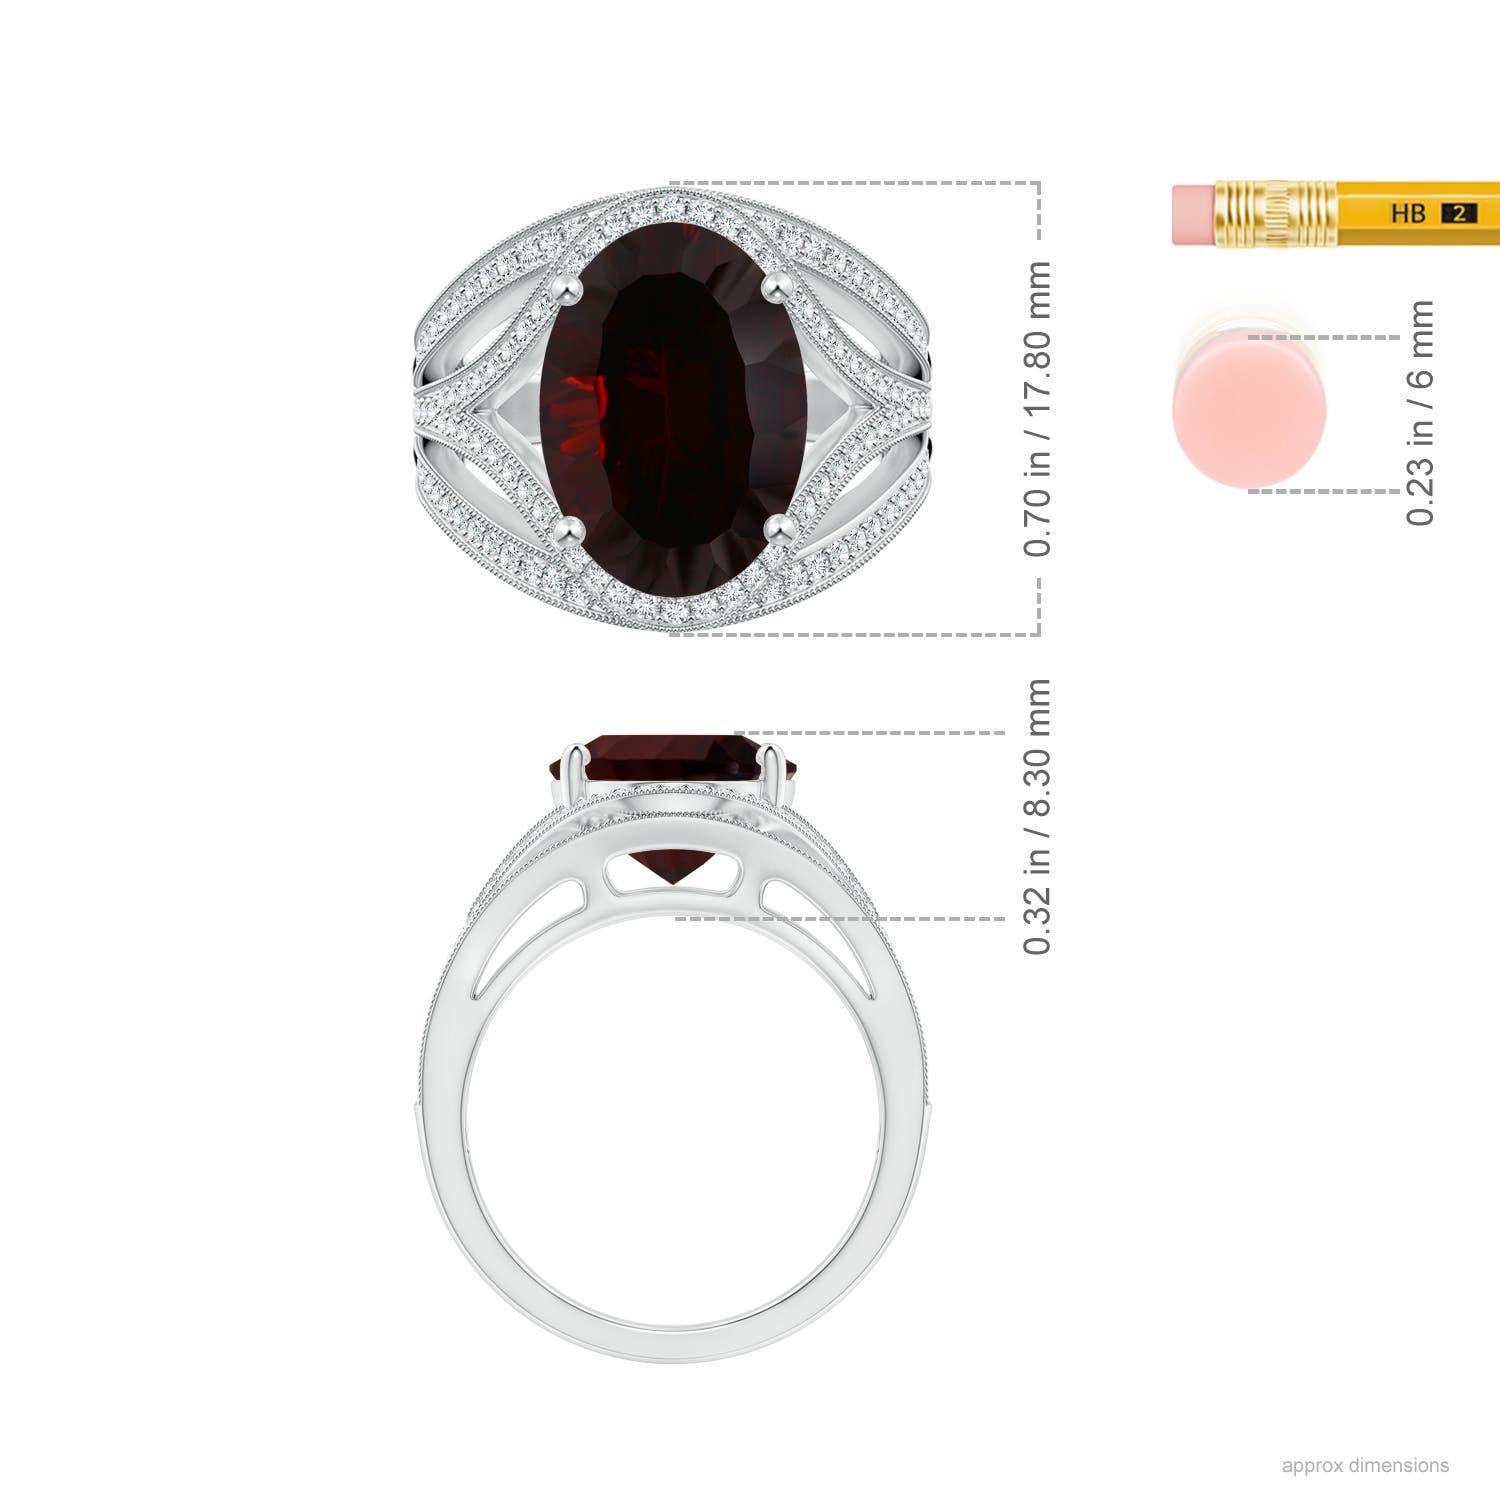 For Sale:  ANGARA GIA Certified Natural Garnet Ornate Shank Cocktail Ring in White Gold 5